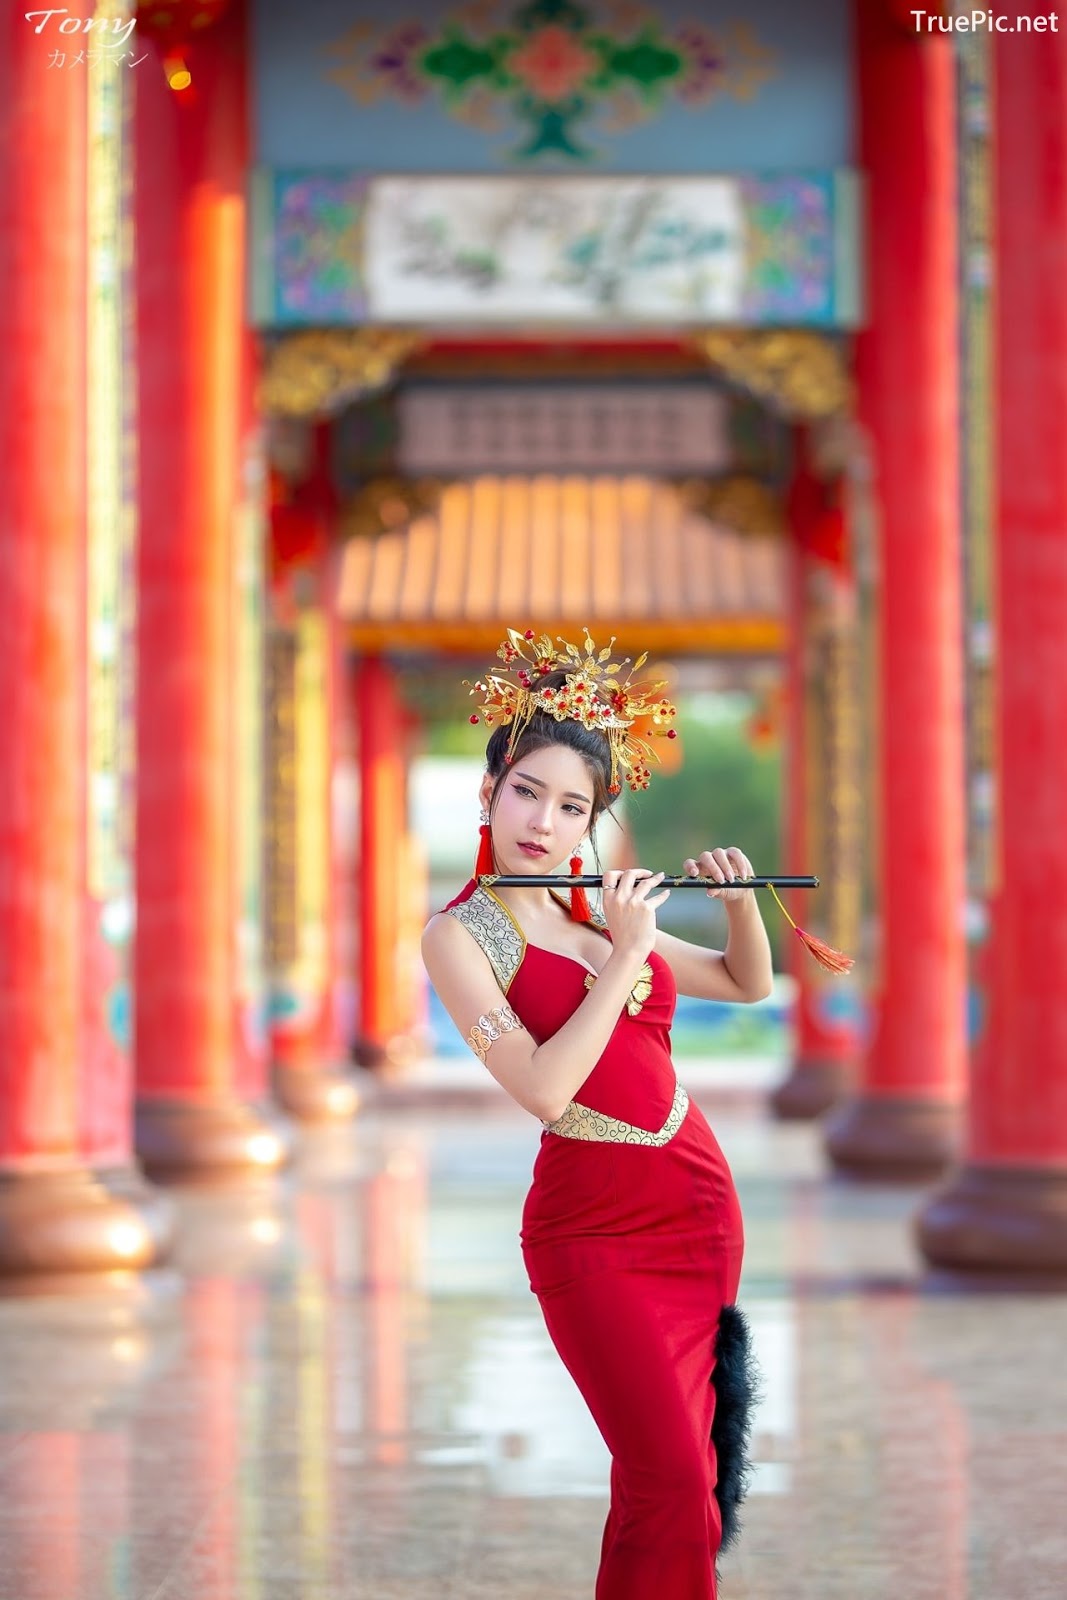 Image-Thailand-Hot-Model-Janet-Kanokwan-Saesim-Sexy-Chinese-Girl-Red-Dress-Traditional-TruePic.net- Picture-32